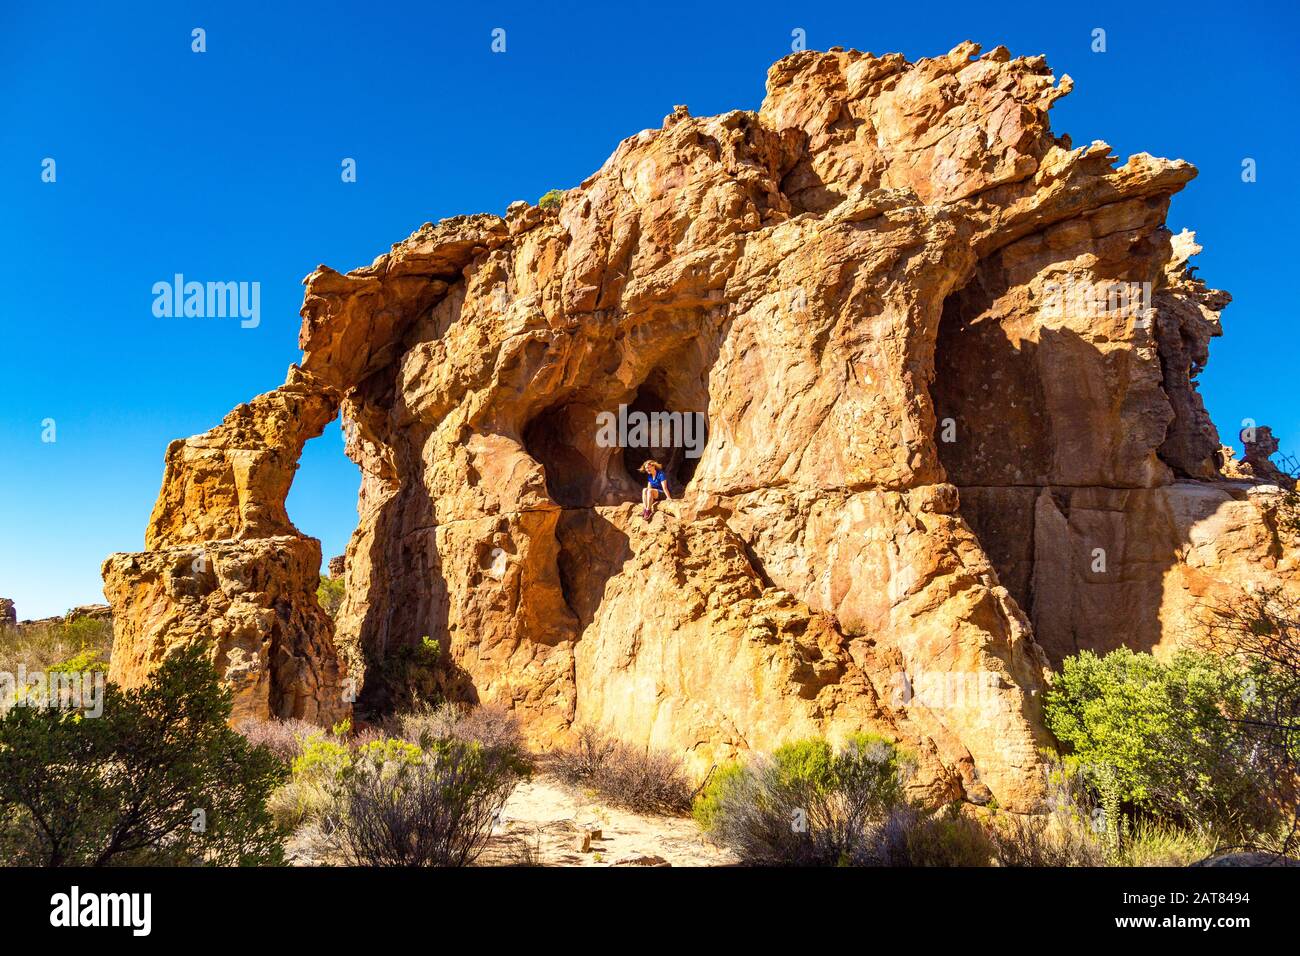 Spectacular rock formation with arch and cave, young woman sitting on an exposed rock, Stadsaal, Cederberg Wilderness Area, South Africa Stock Photo